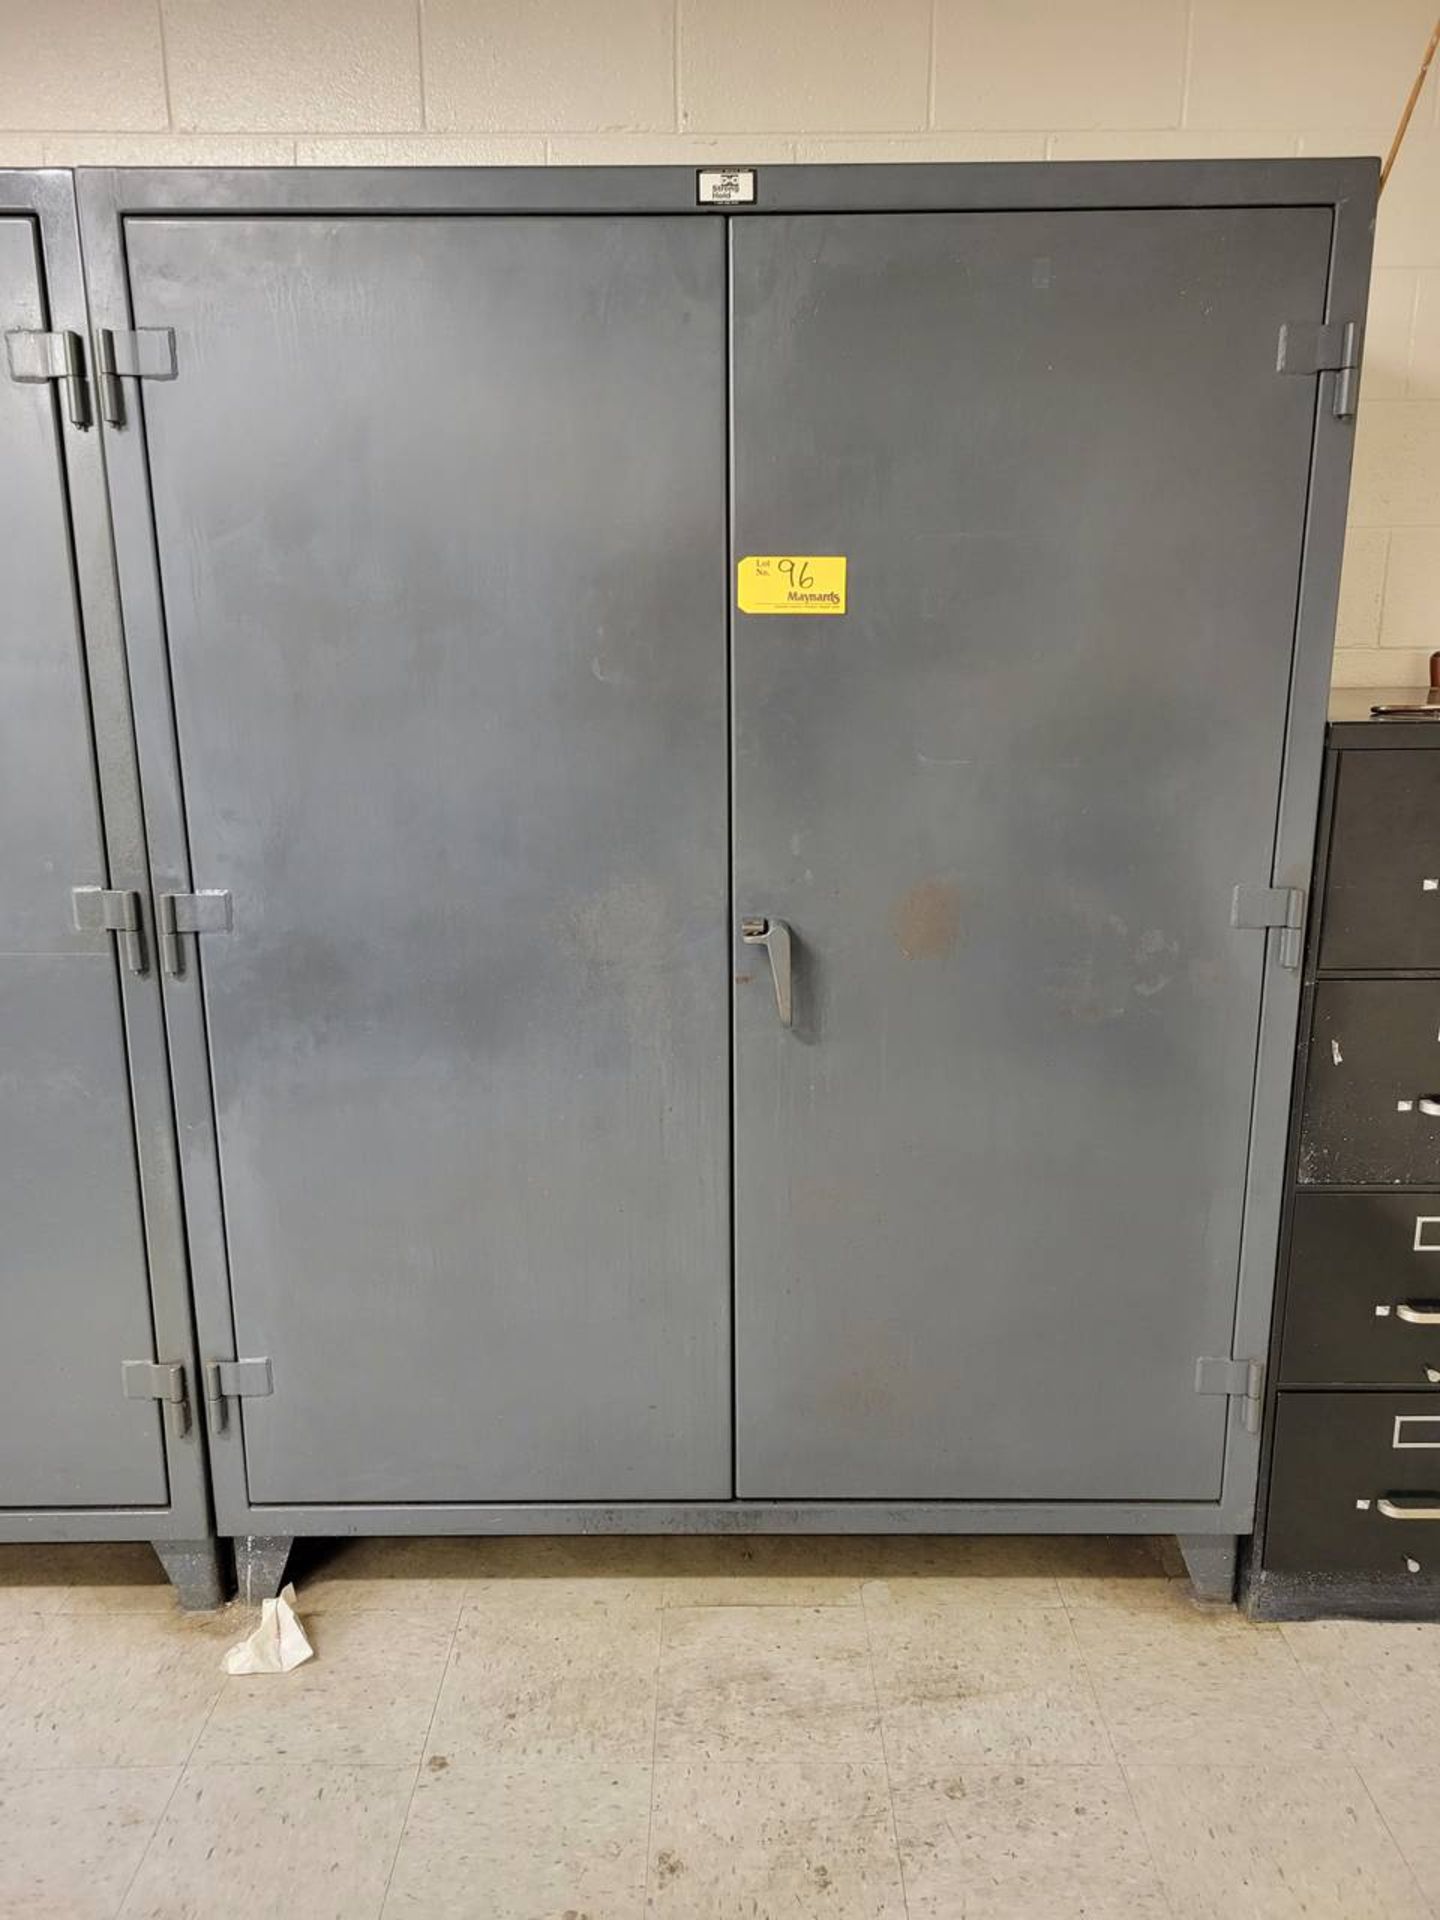 Strong Hold 68" x 55" two door heavy duty steel storage cabinet